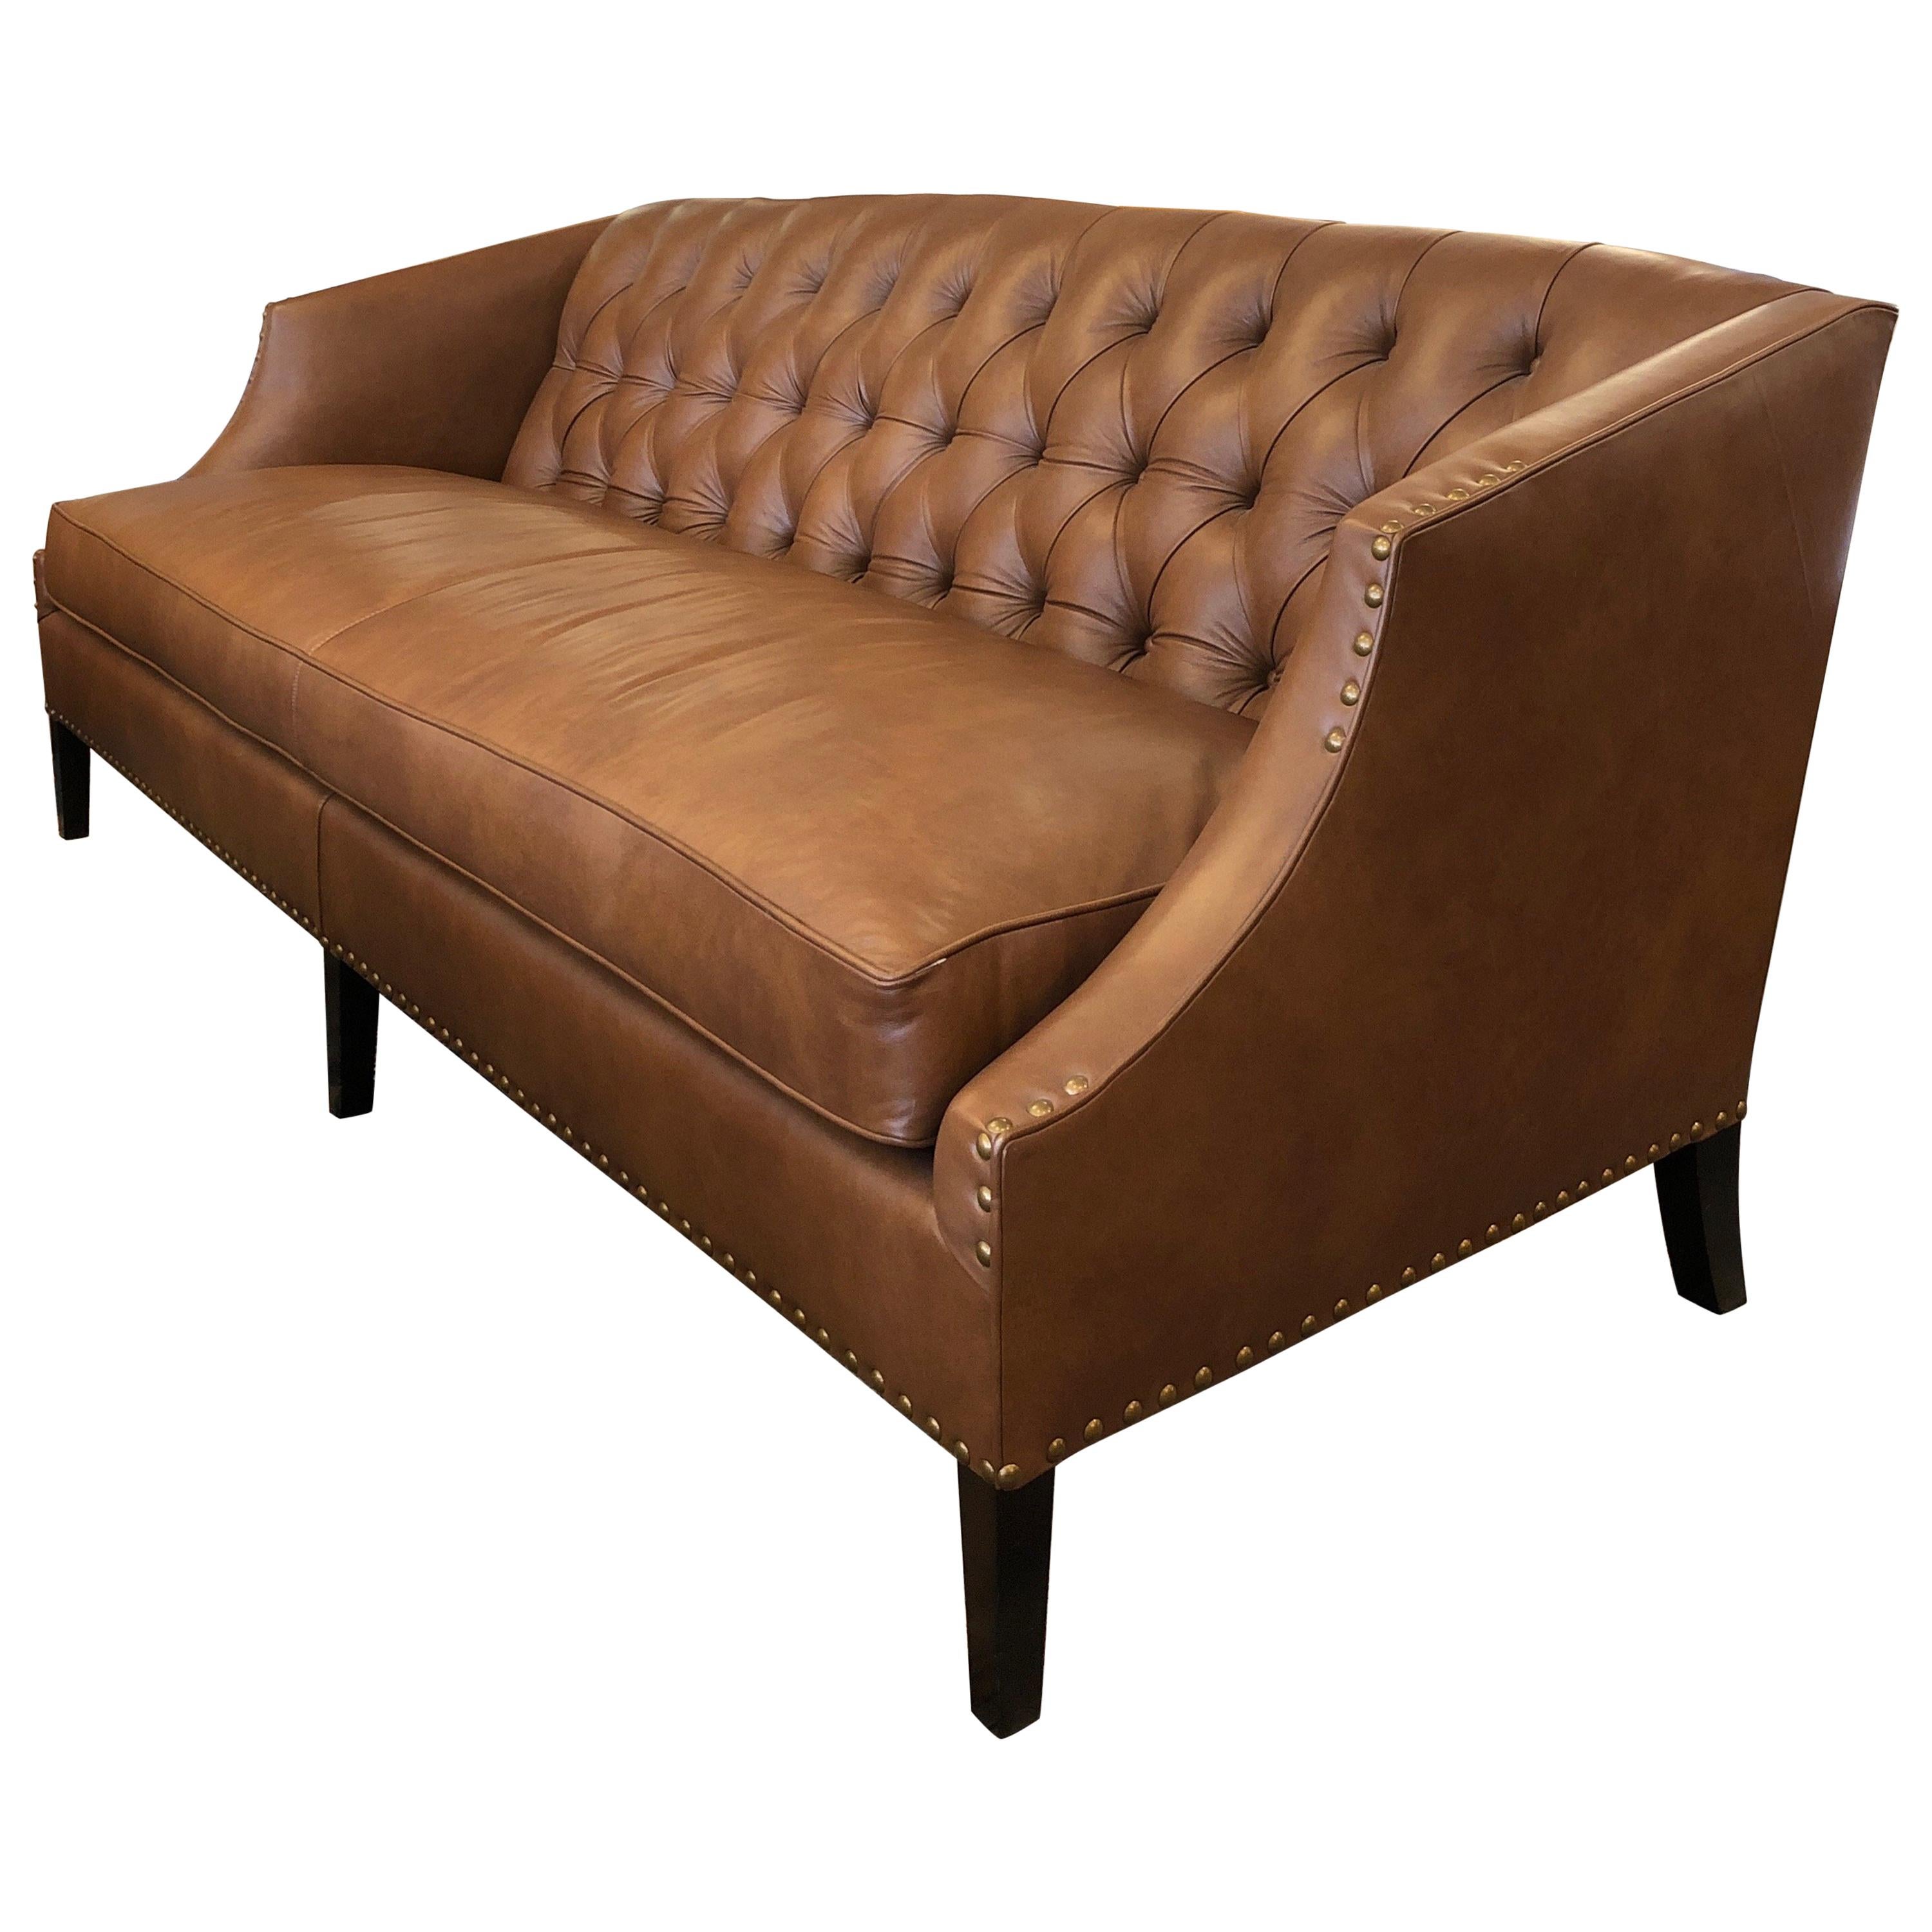 New Becki Leather Sofa from Leathercraft For Sale